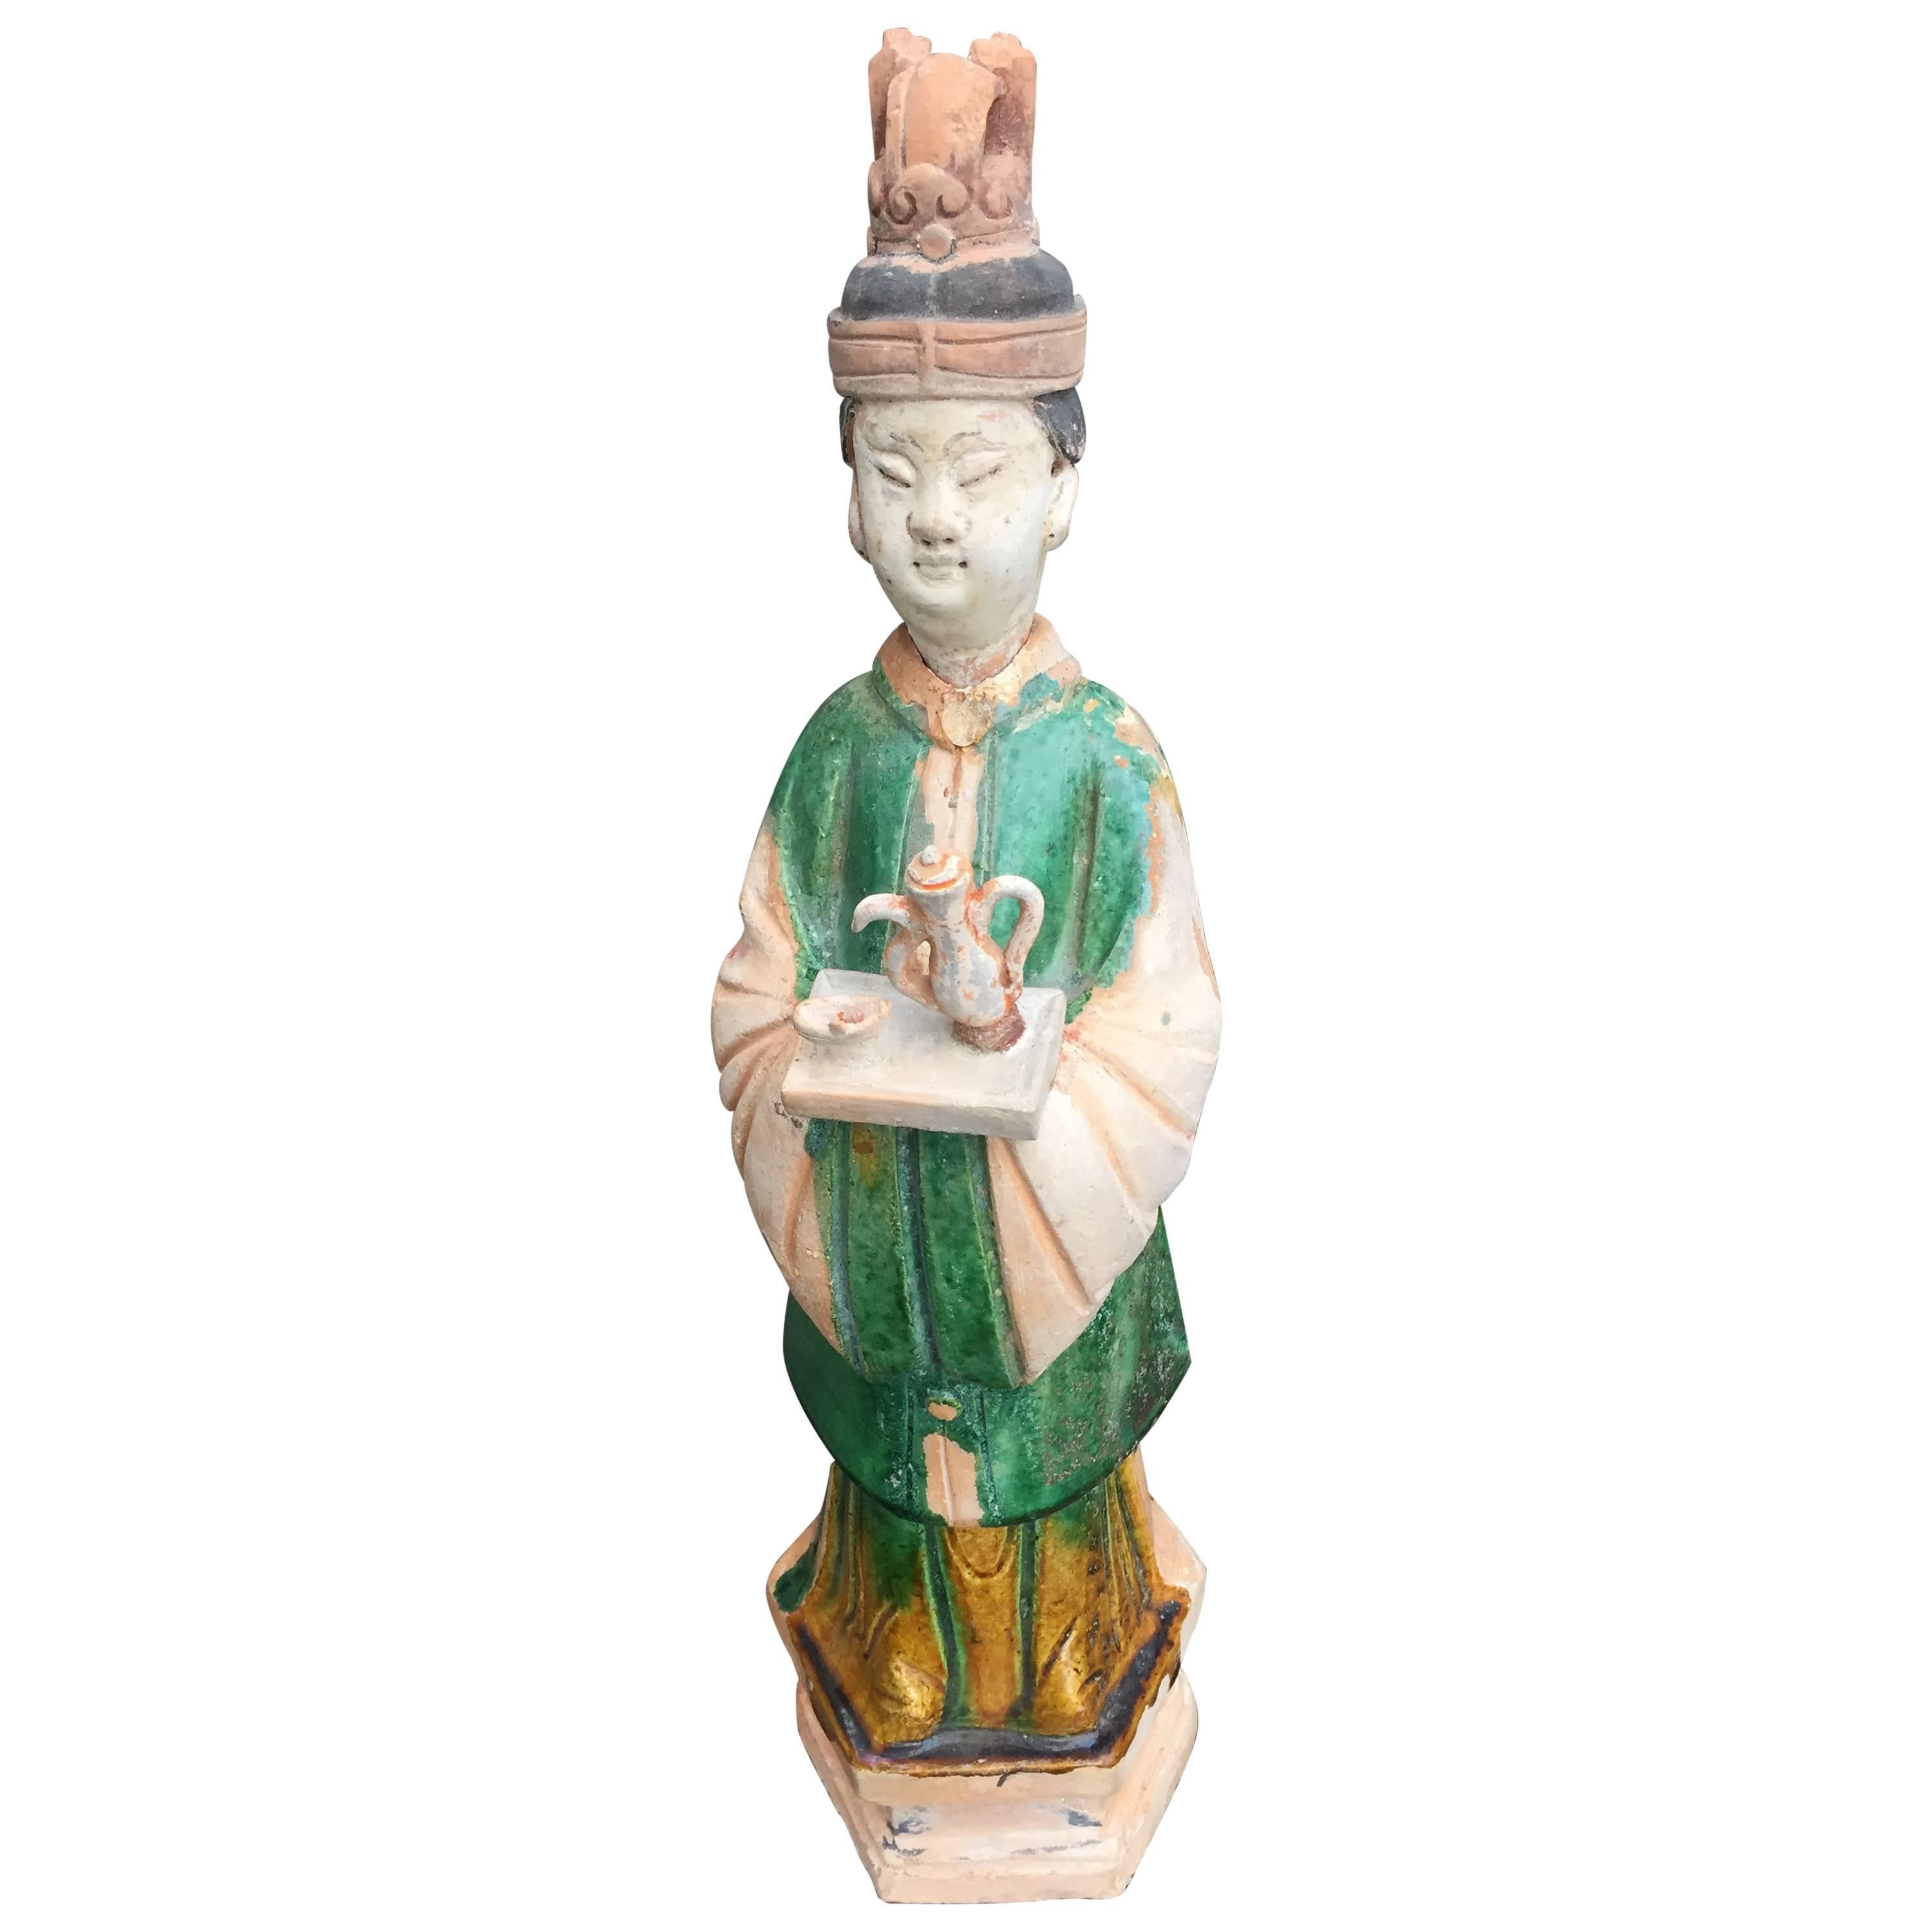 Important Ancient Chinese Ming Dynasty "Tea Attendant" Sculpture, 1368-1644 